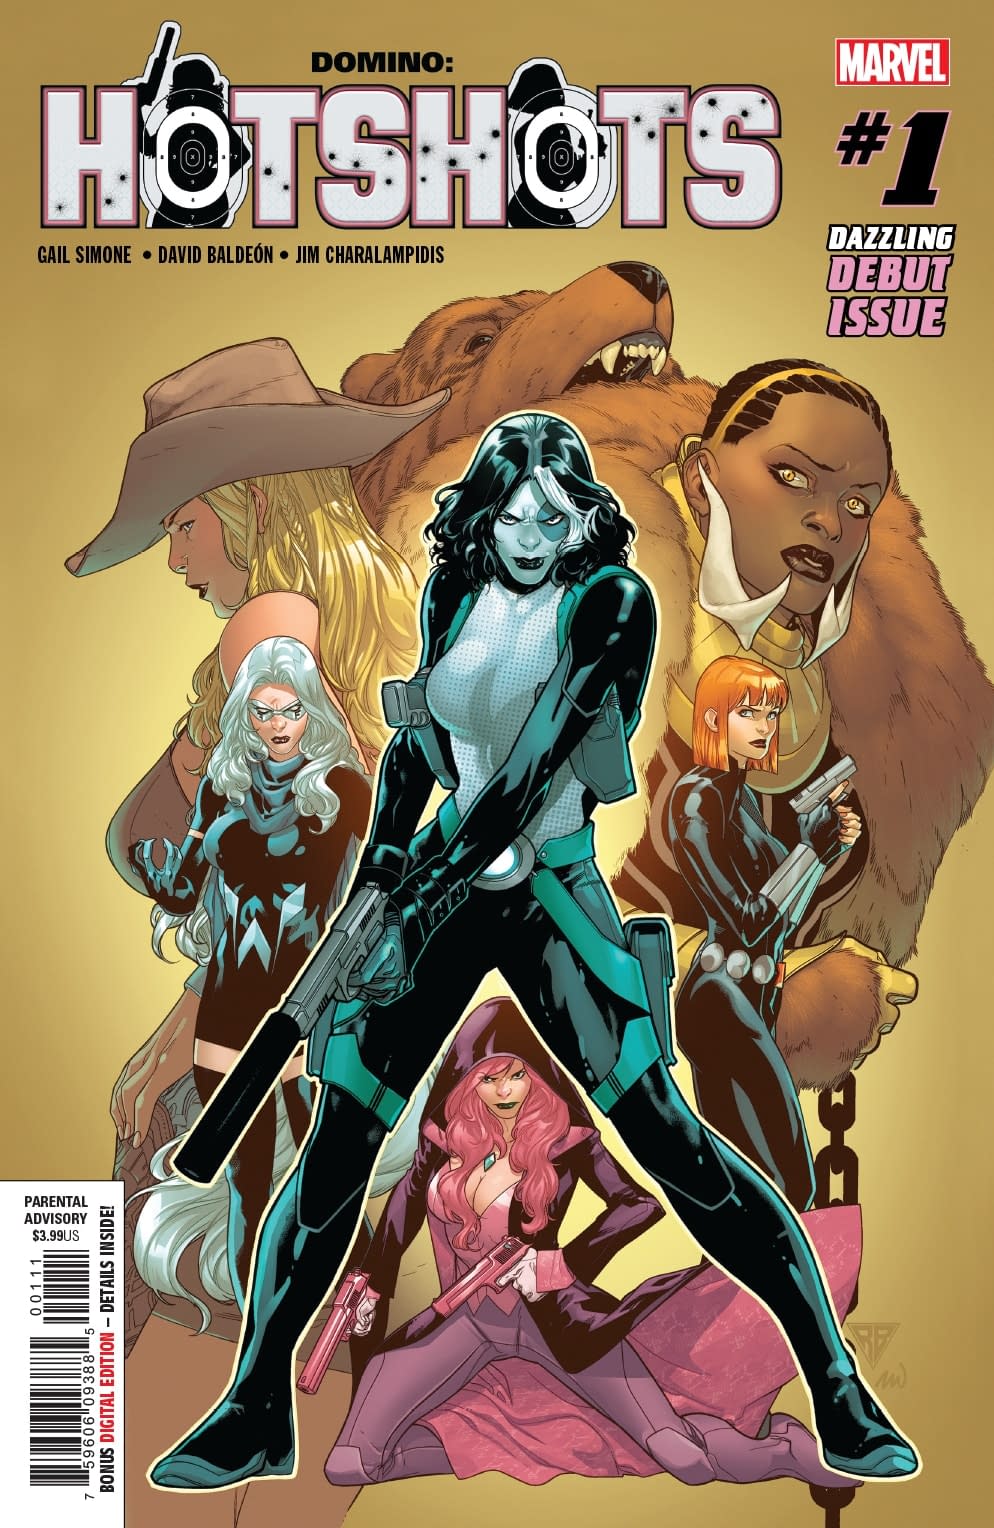 Domino Fangirls Out Over the Black Widow in Next Week's Hotshots #1